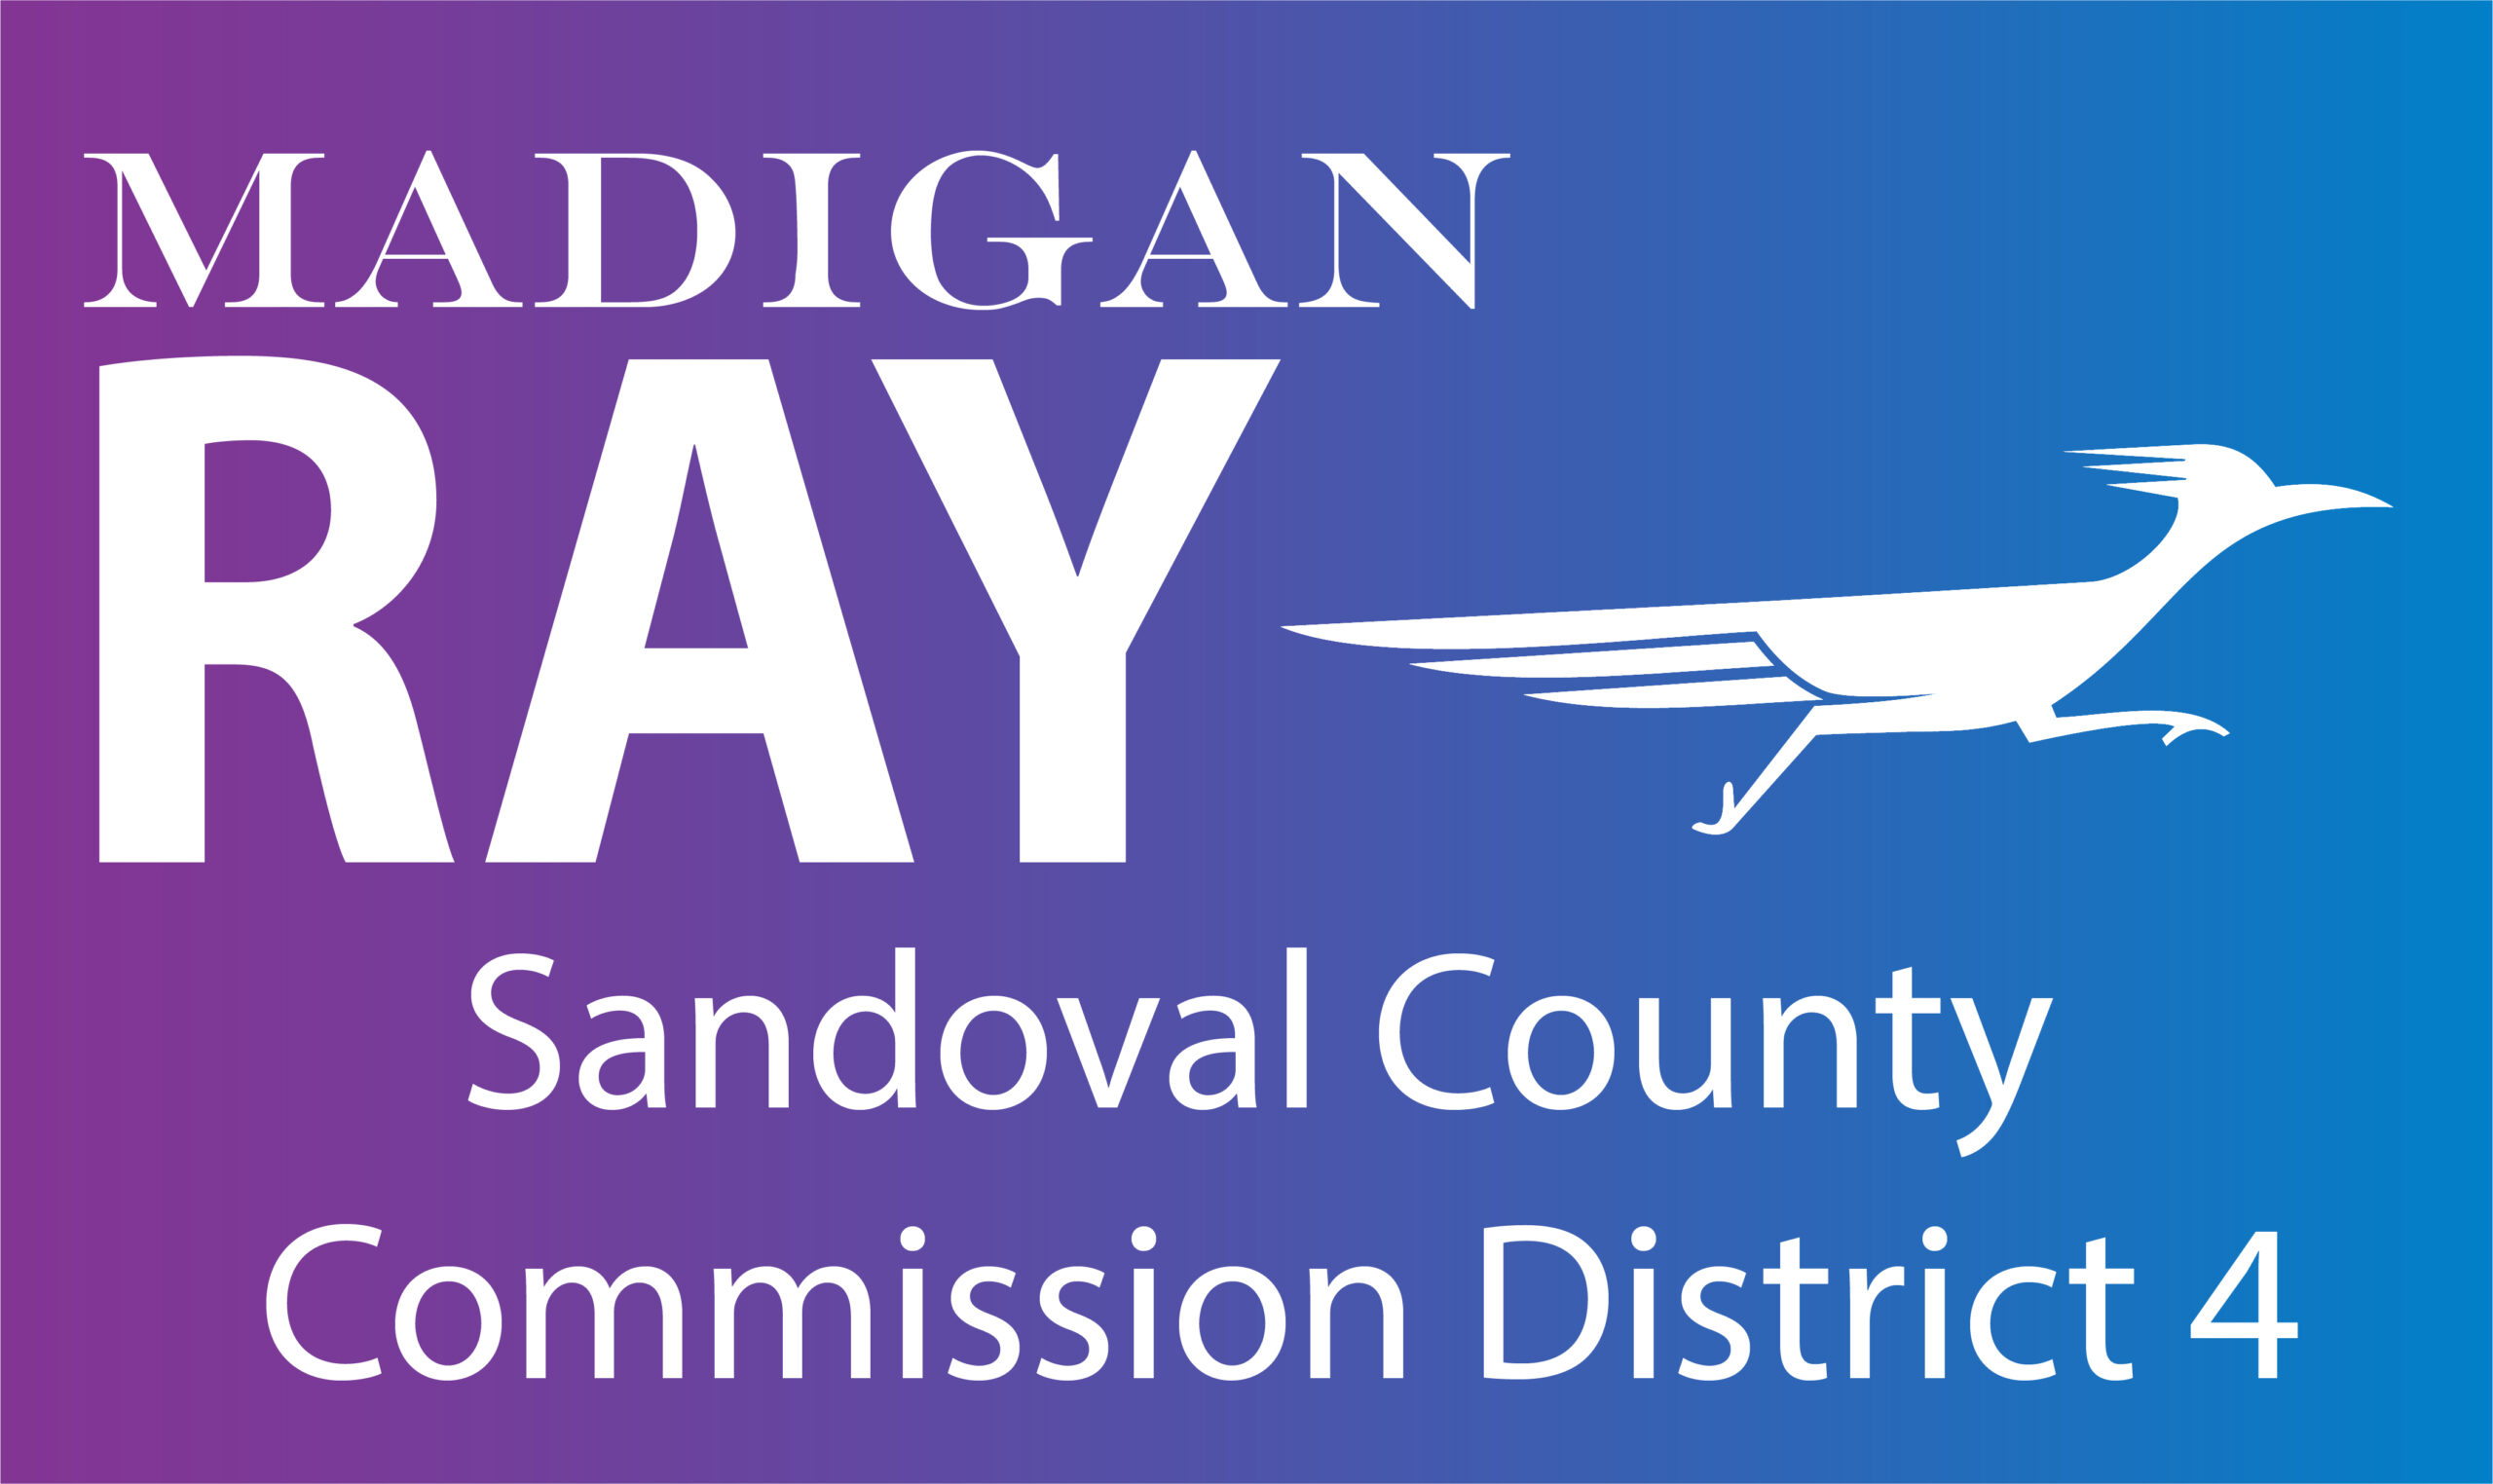 Madigan Ray for Sandoval County Commission District 4